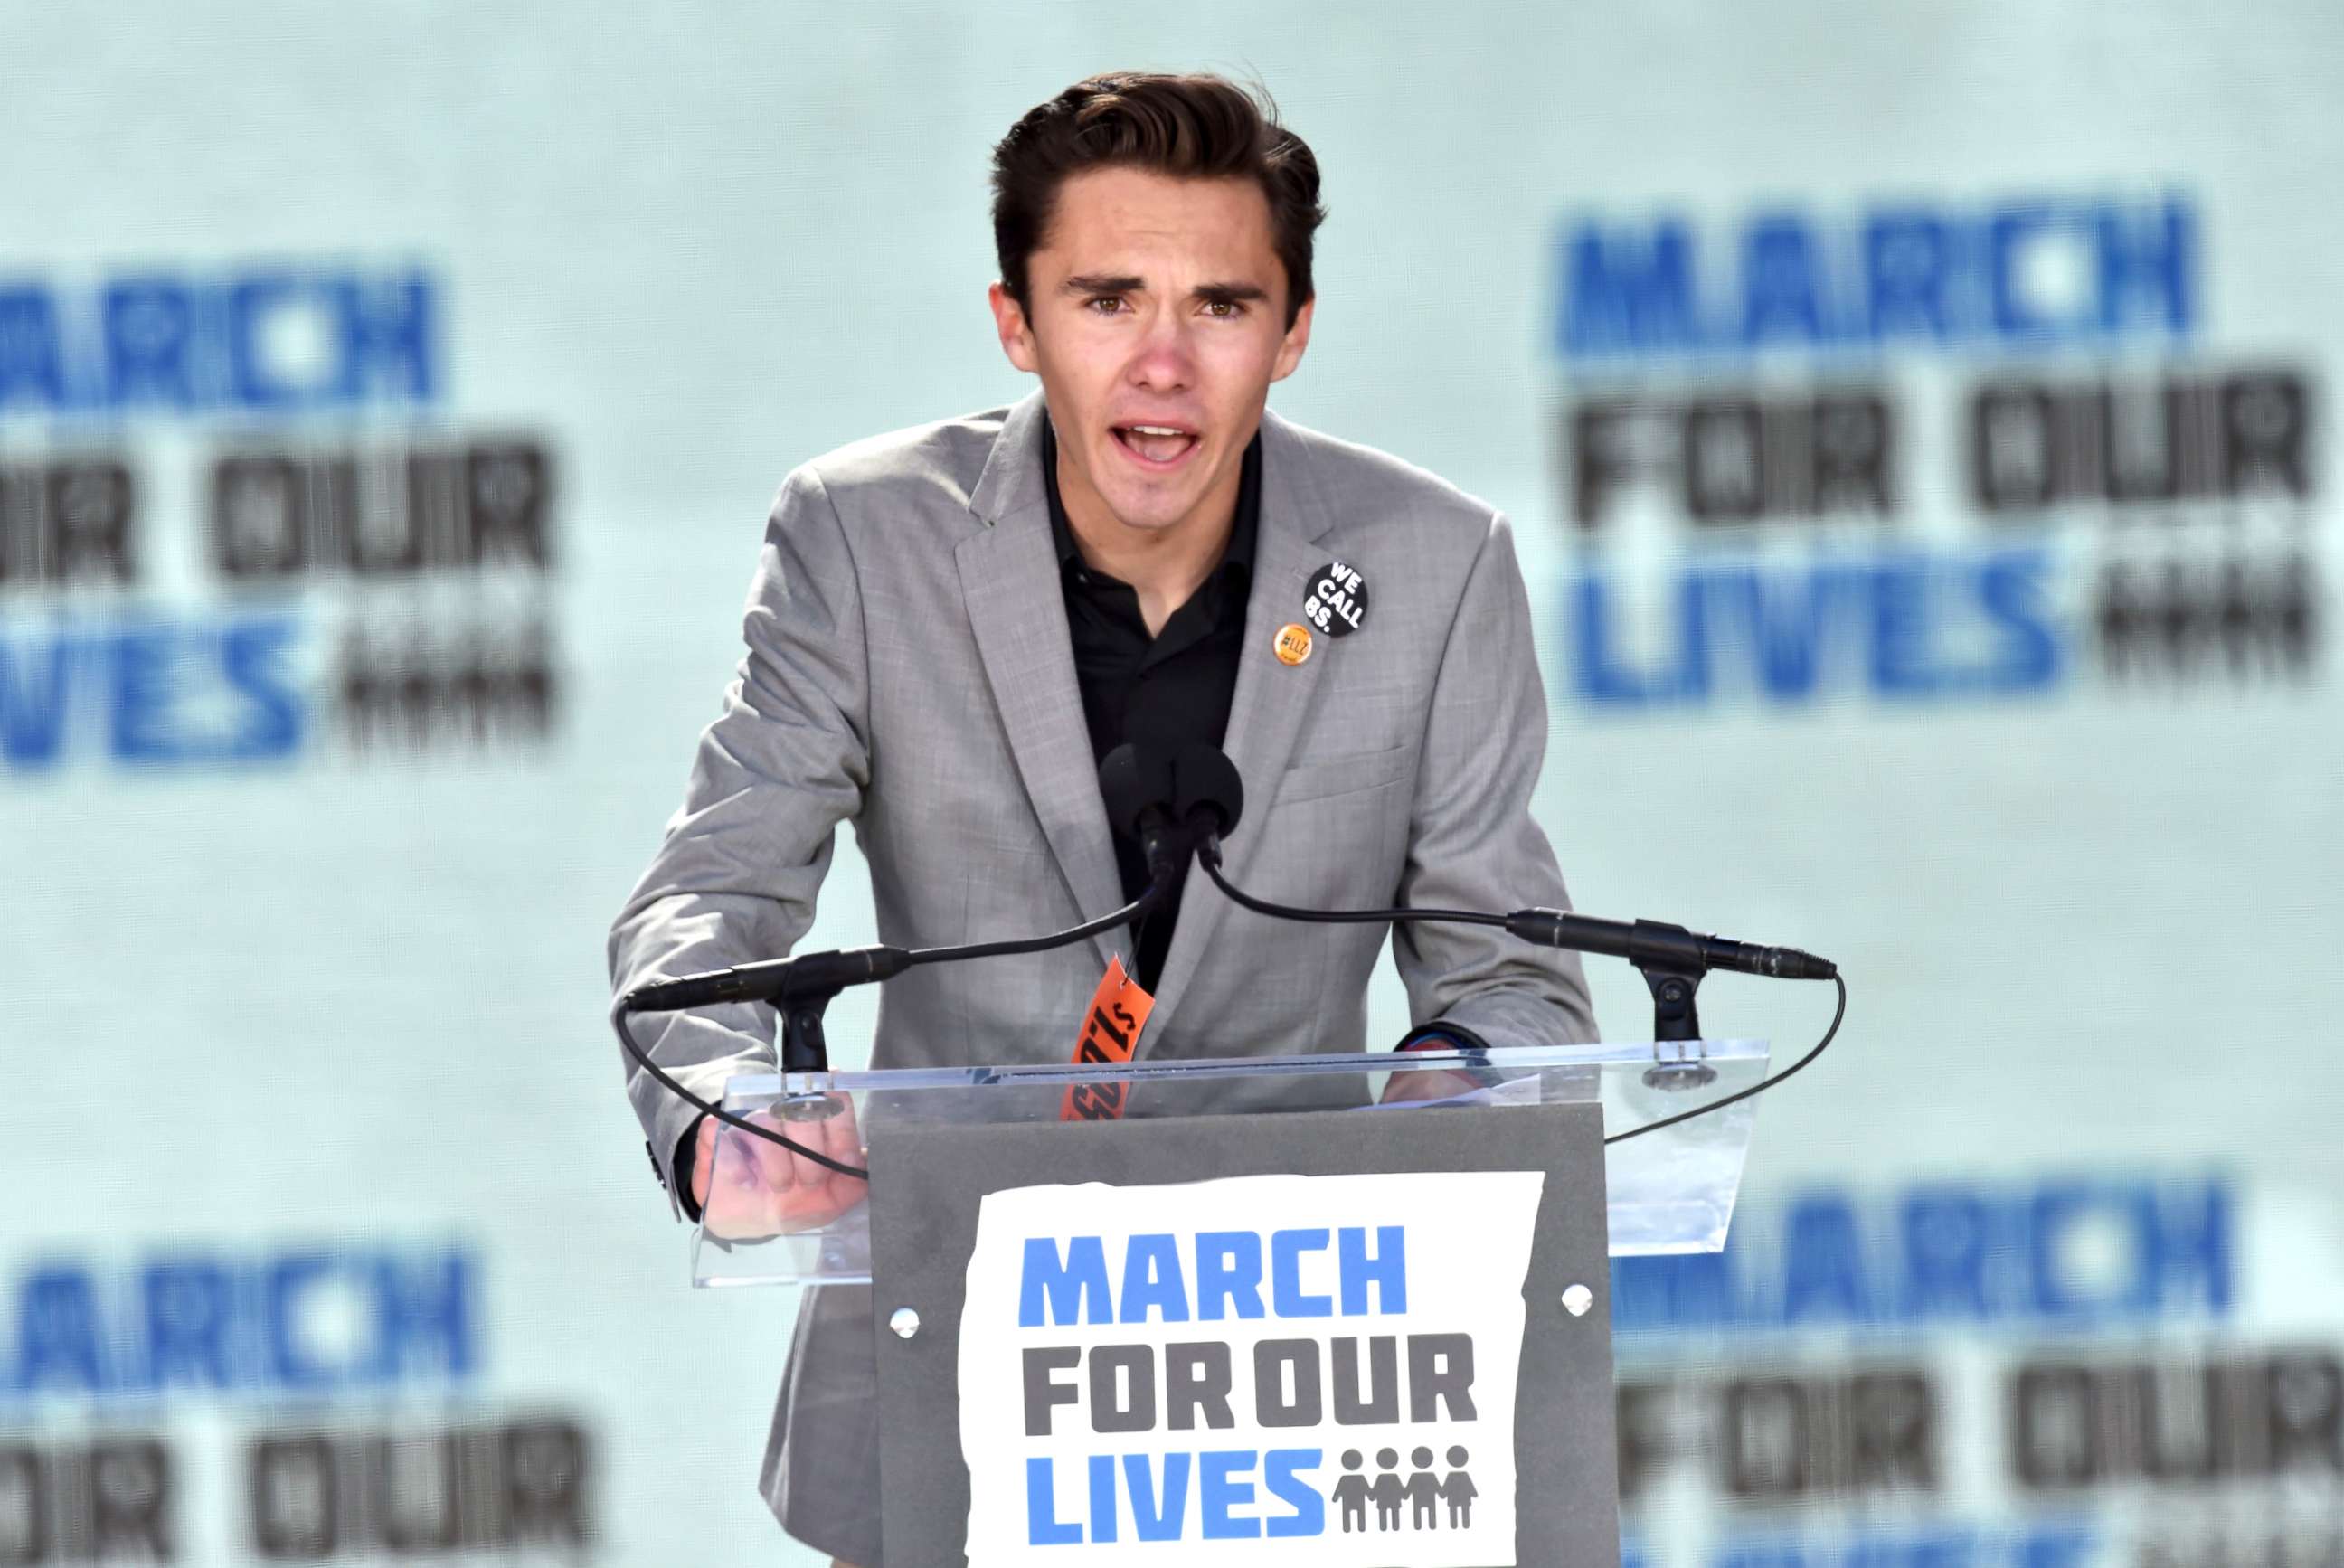 PHOTO: Marjory Stoneman Douglas High School student David Hogg speaks during the March for Our Lives Rally in Washington, D.C., March 24, 2018. 